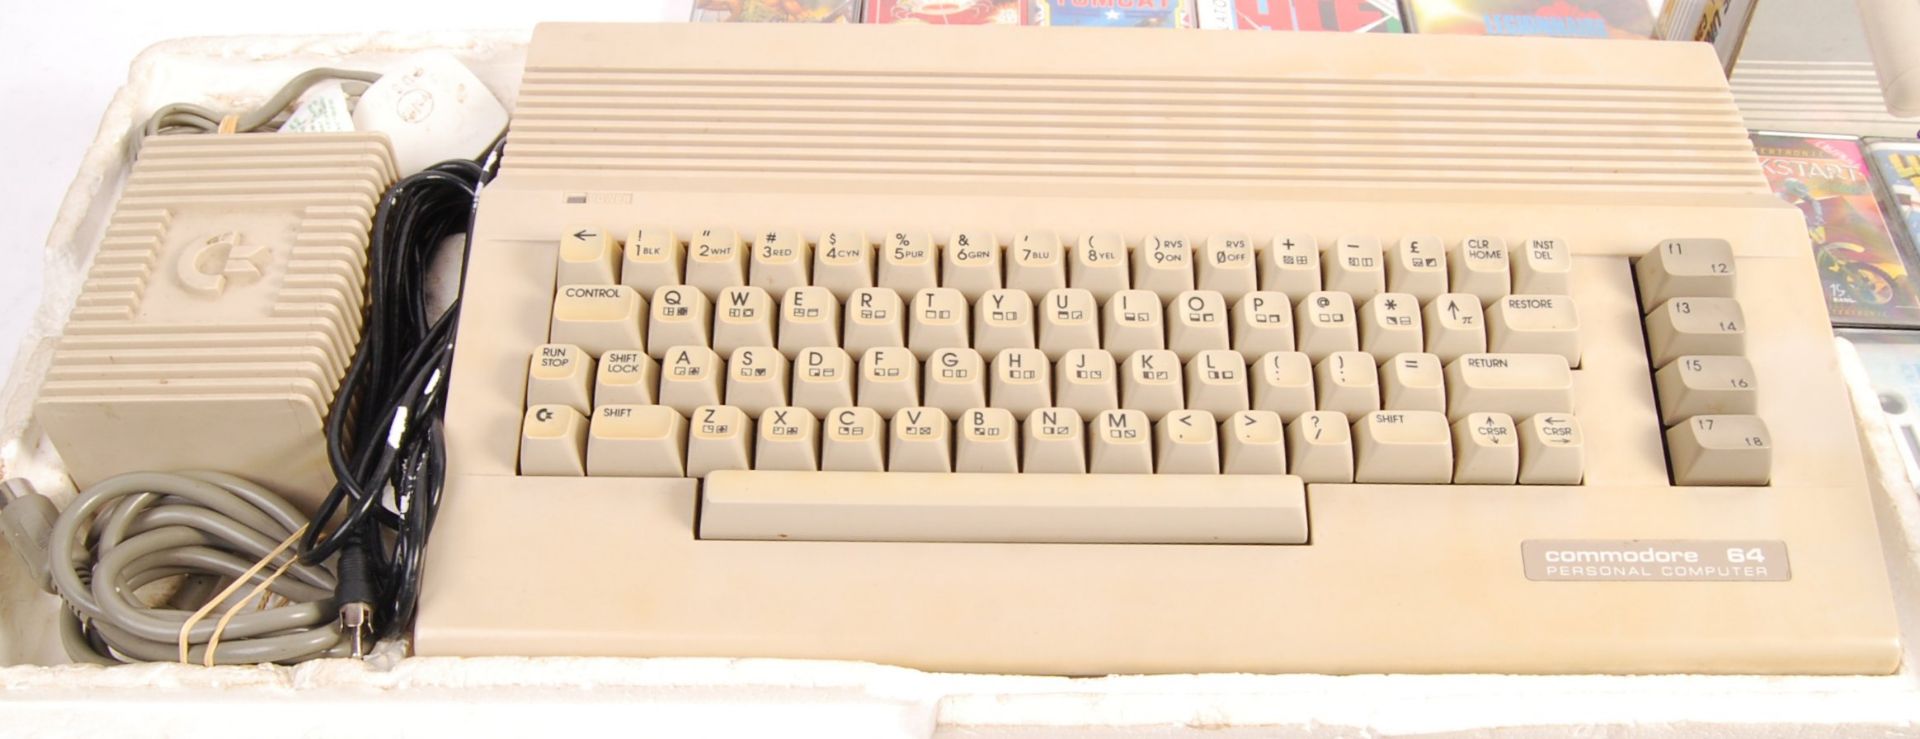 COMMODORE 64 VIDEO GAMES COMPUTER CONSOLE WITH 1530 UNIT - Image 2 of 9